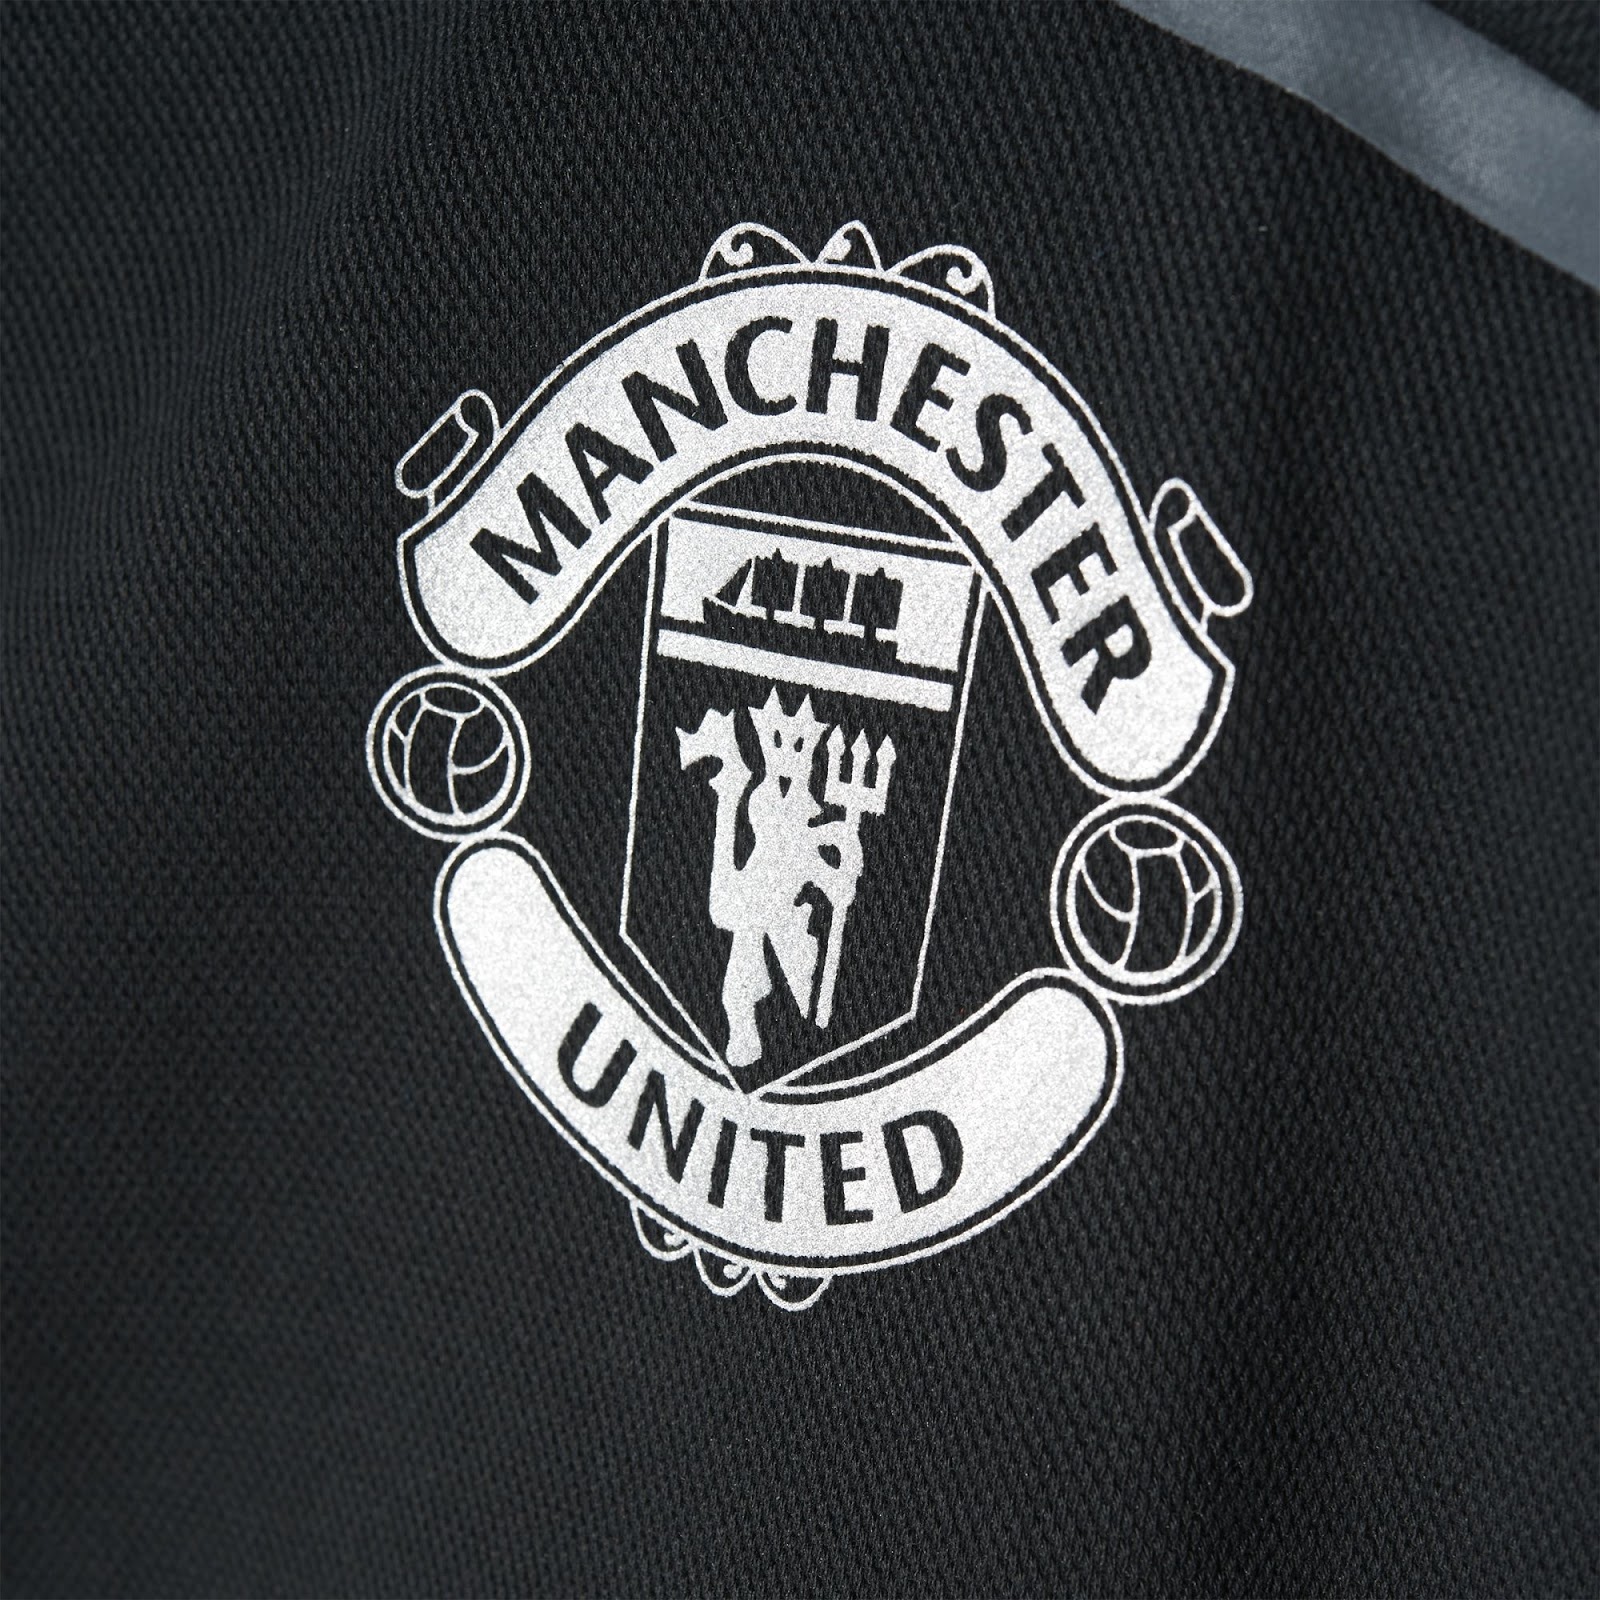 Manchester United 16-17 Anthem Jacket Released - Footy Headlines